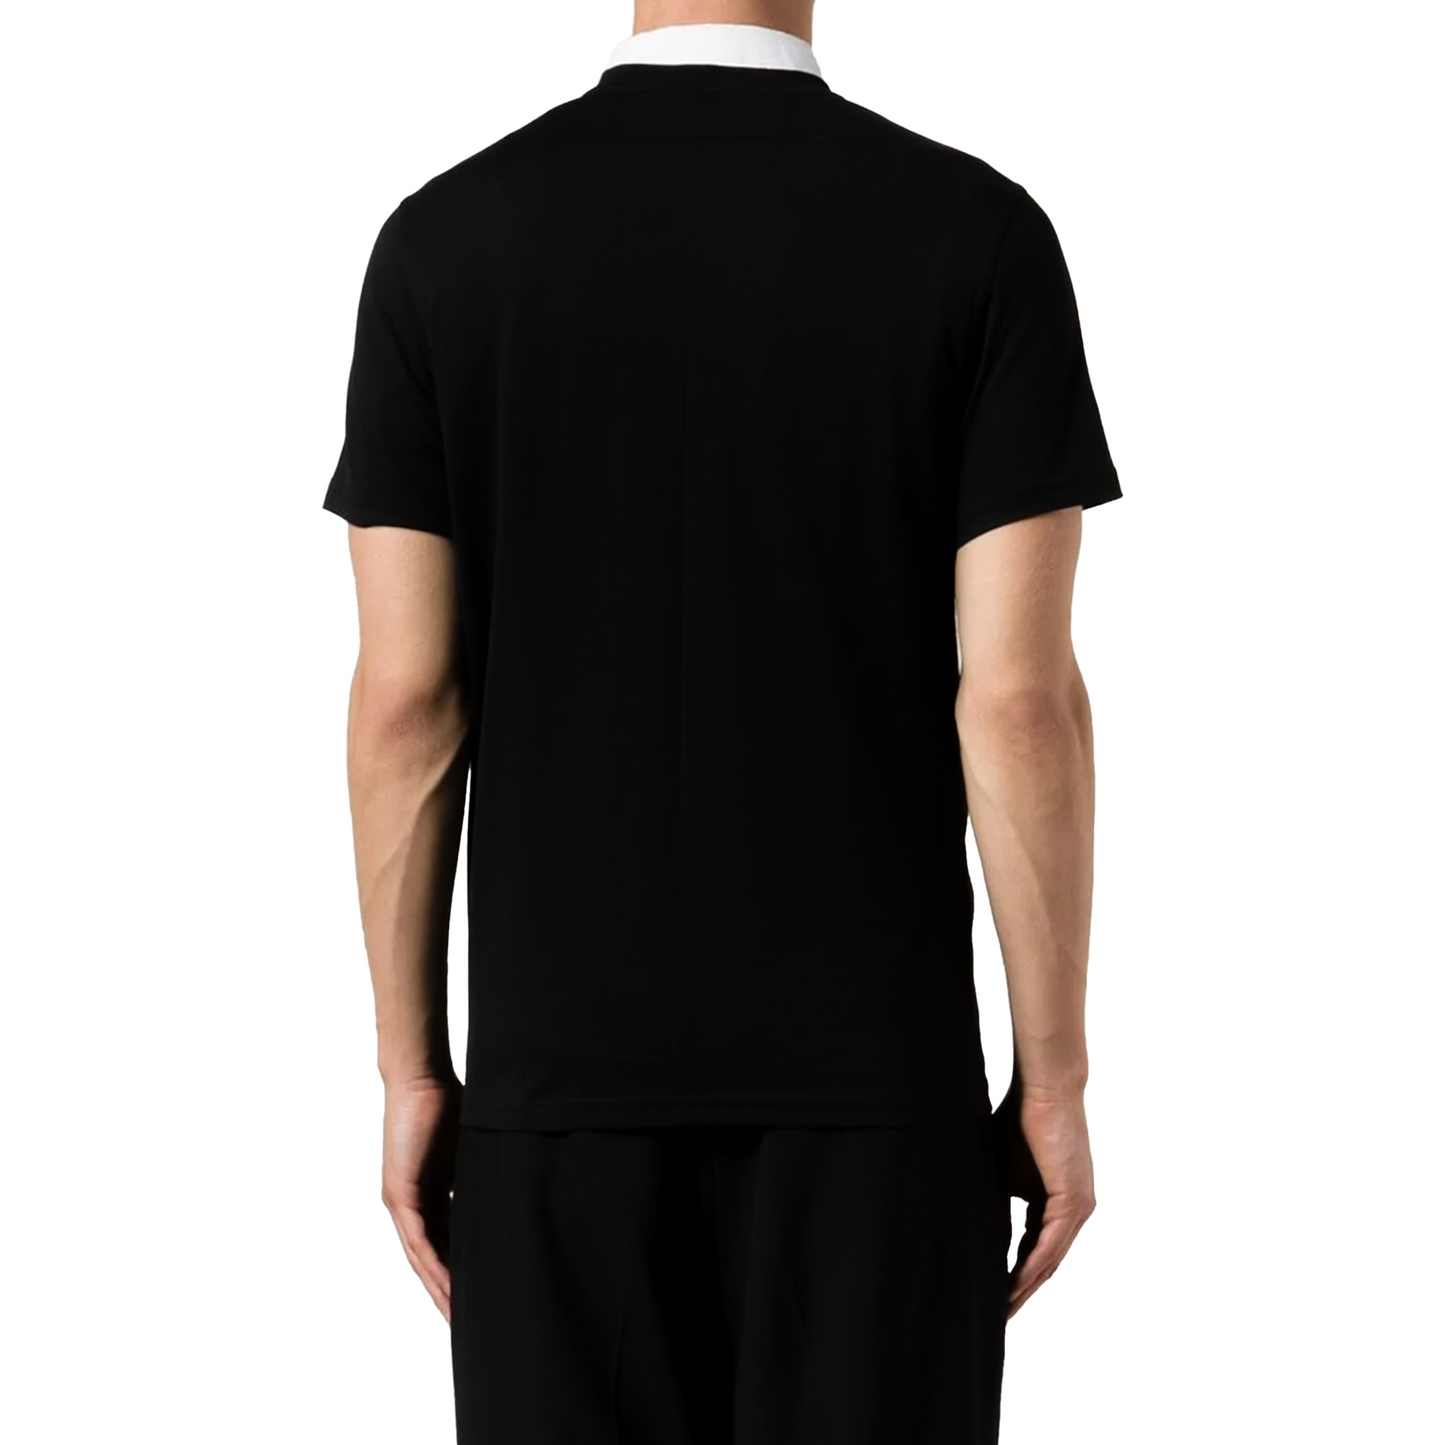 Givenchy Rottweiler Print Tee Black (Oversize Fit)